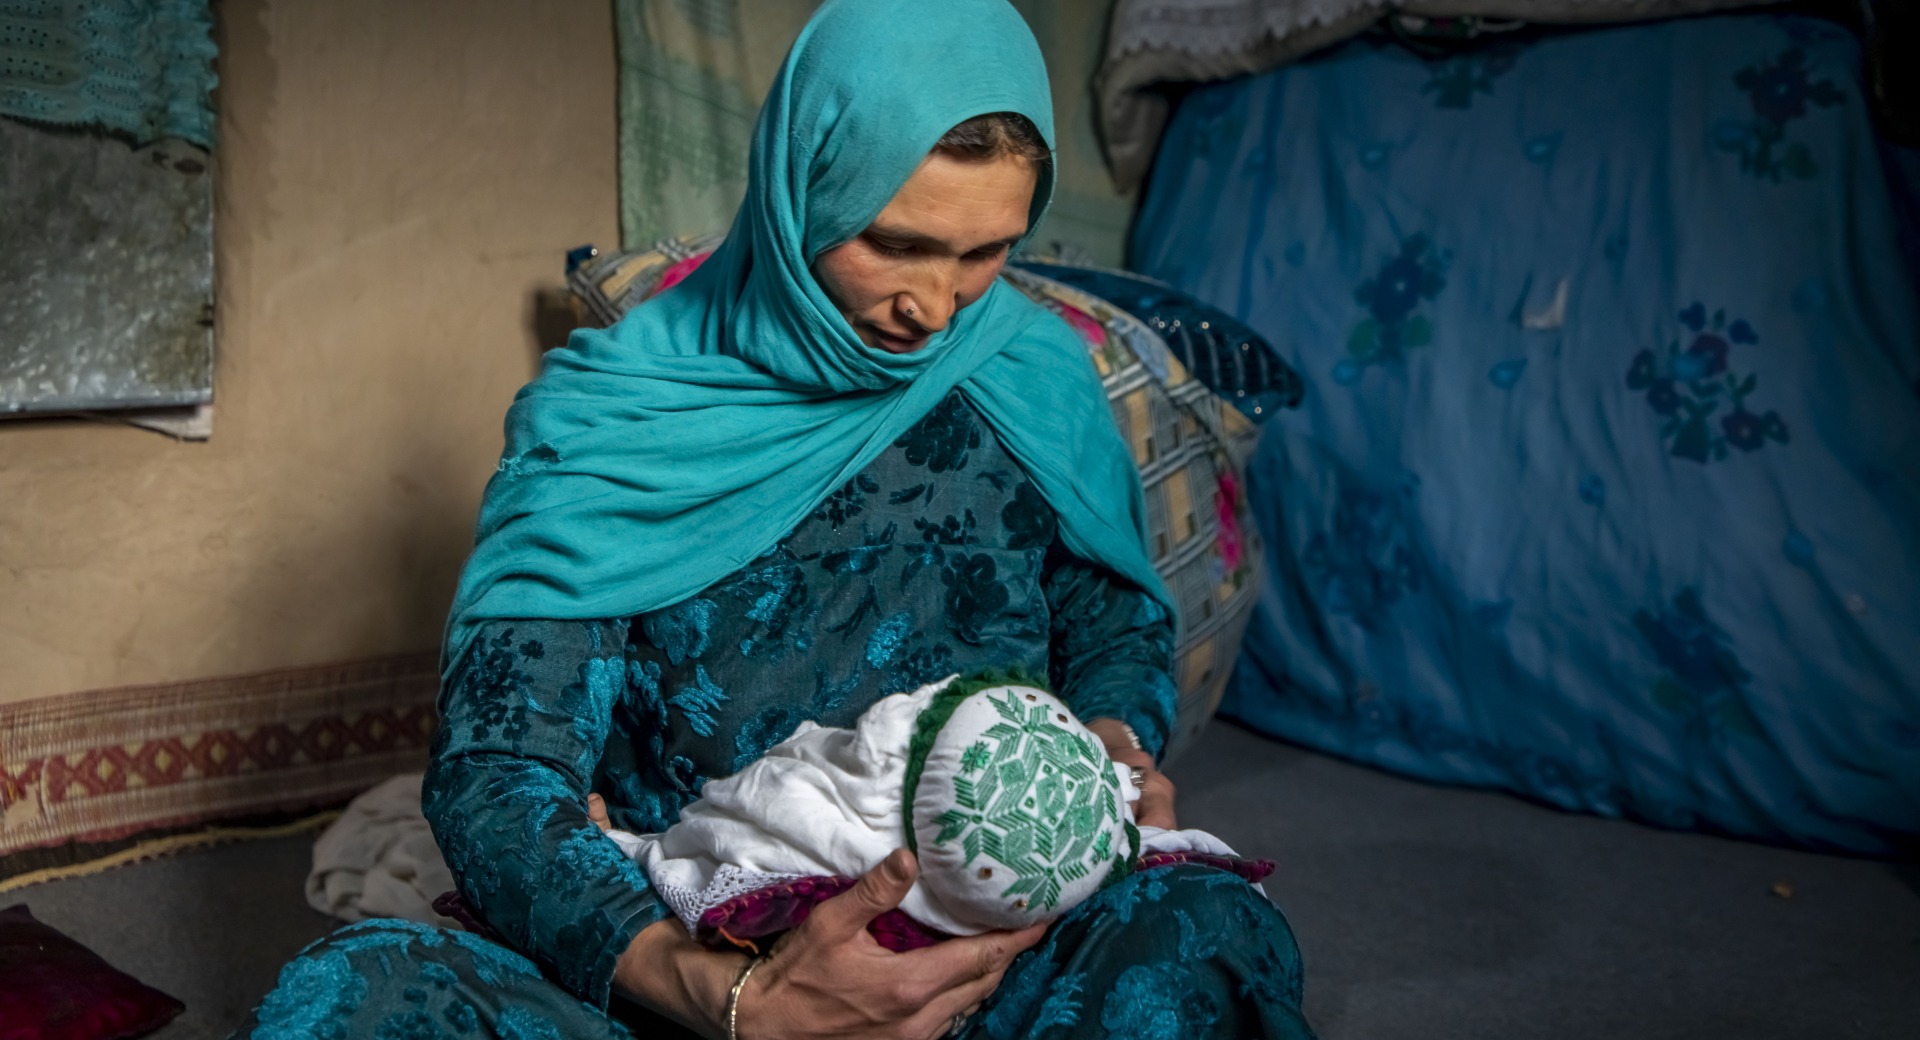 Nadia nurses her youngest child, 2 months old, at home in Duykondi Province, Afghanistan. Action Against Hunger works in this area to manage feeding programs and provide mobile health and nutrition support.